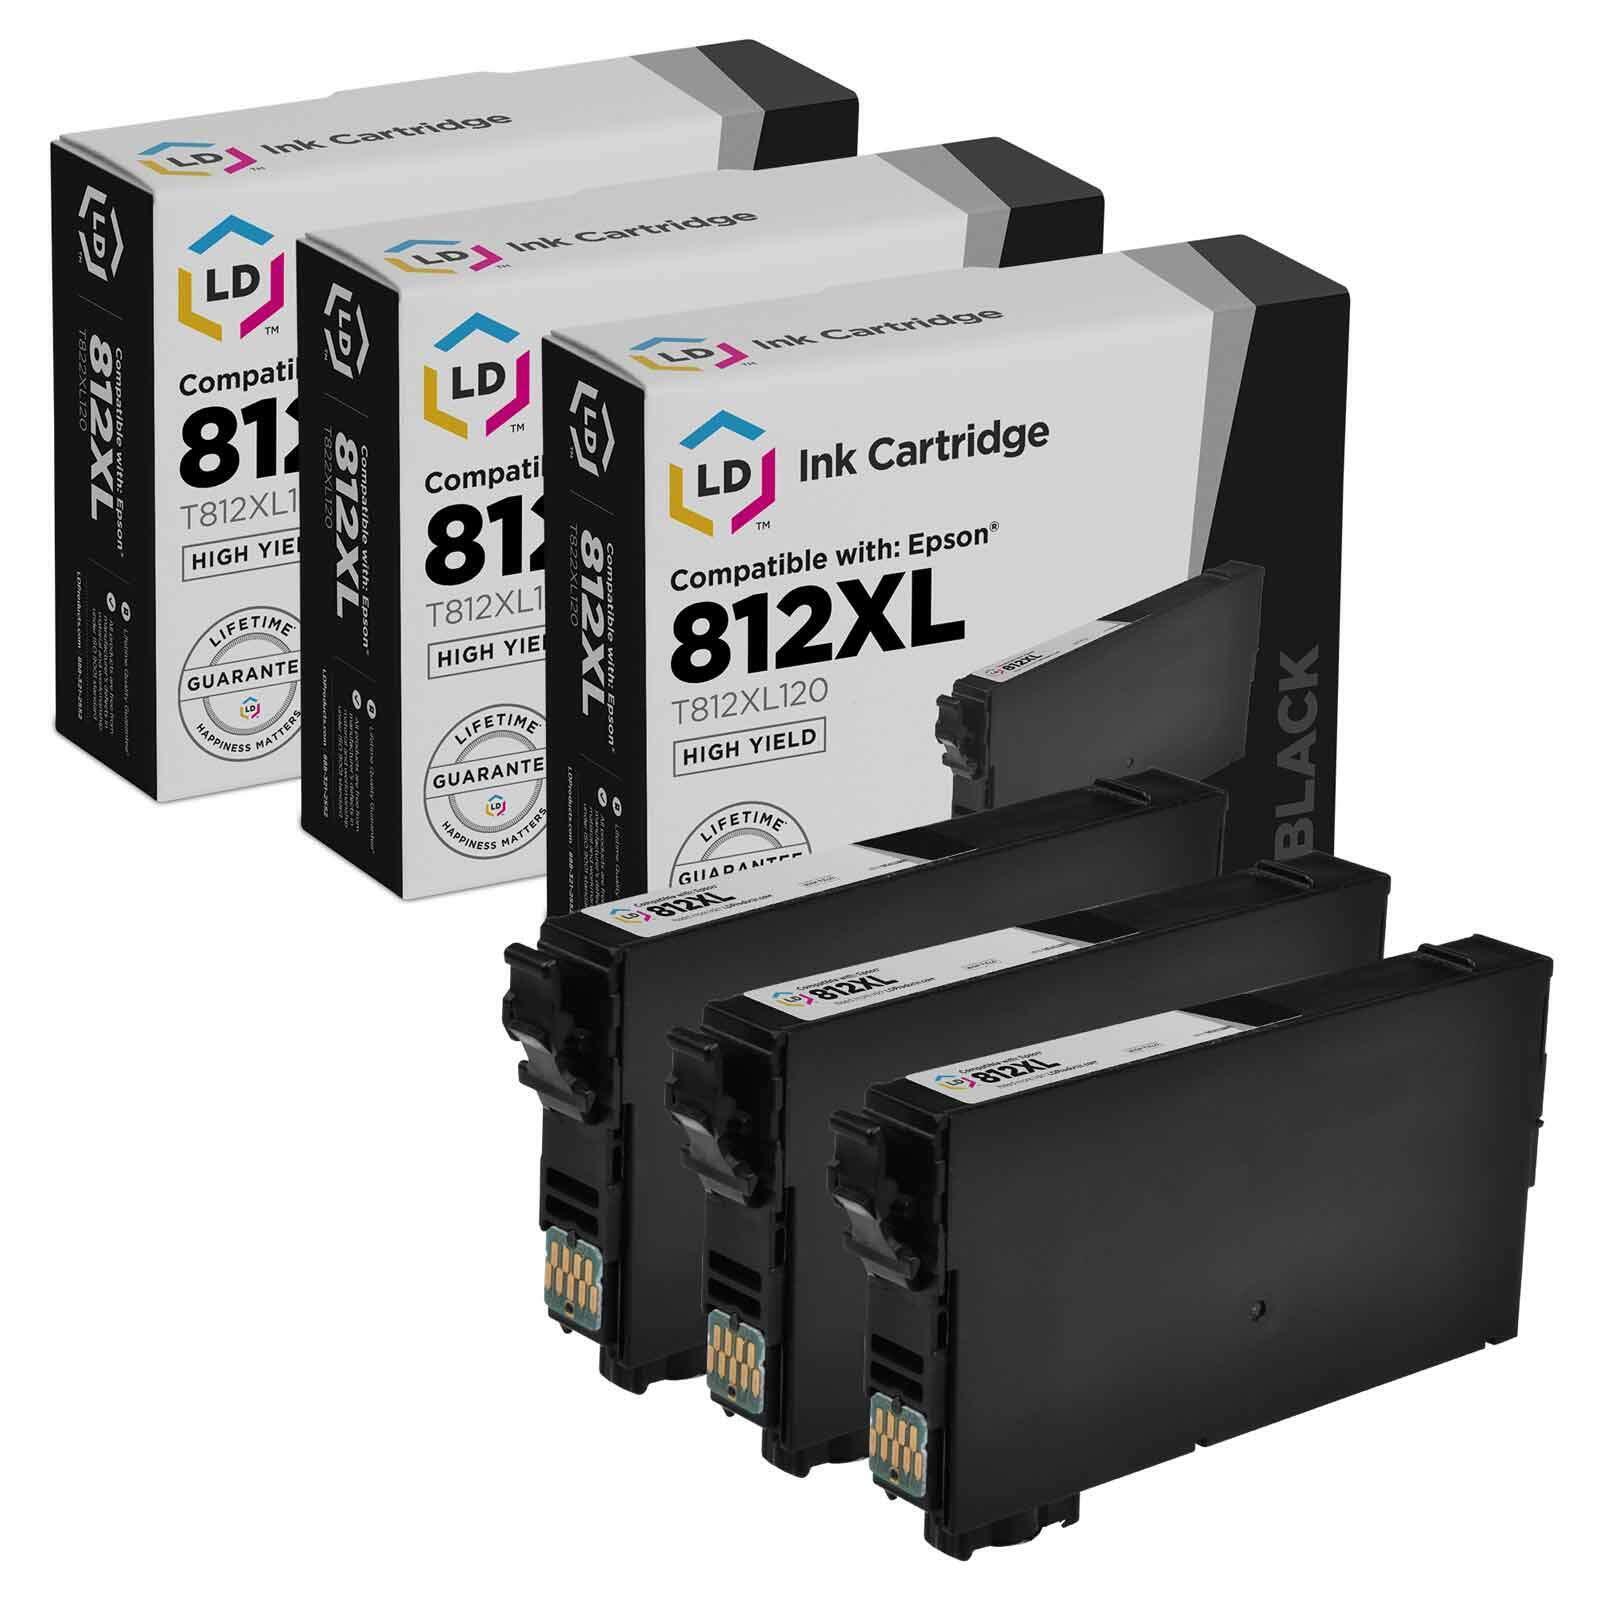 Ink Replacements for Epson 812XL T812XL T812XL120 HY (Blk, 3-Pk)